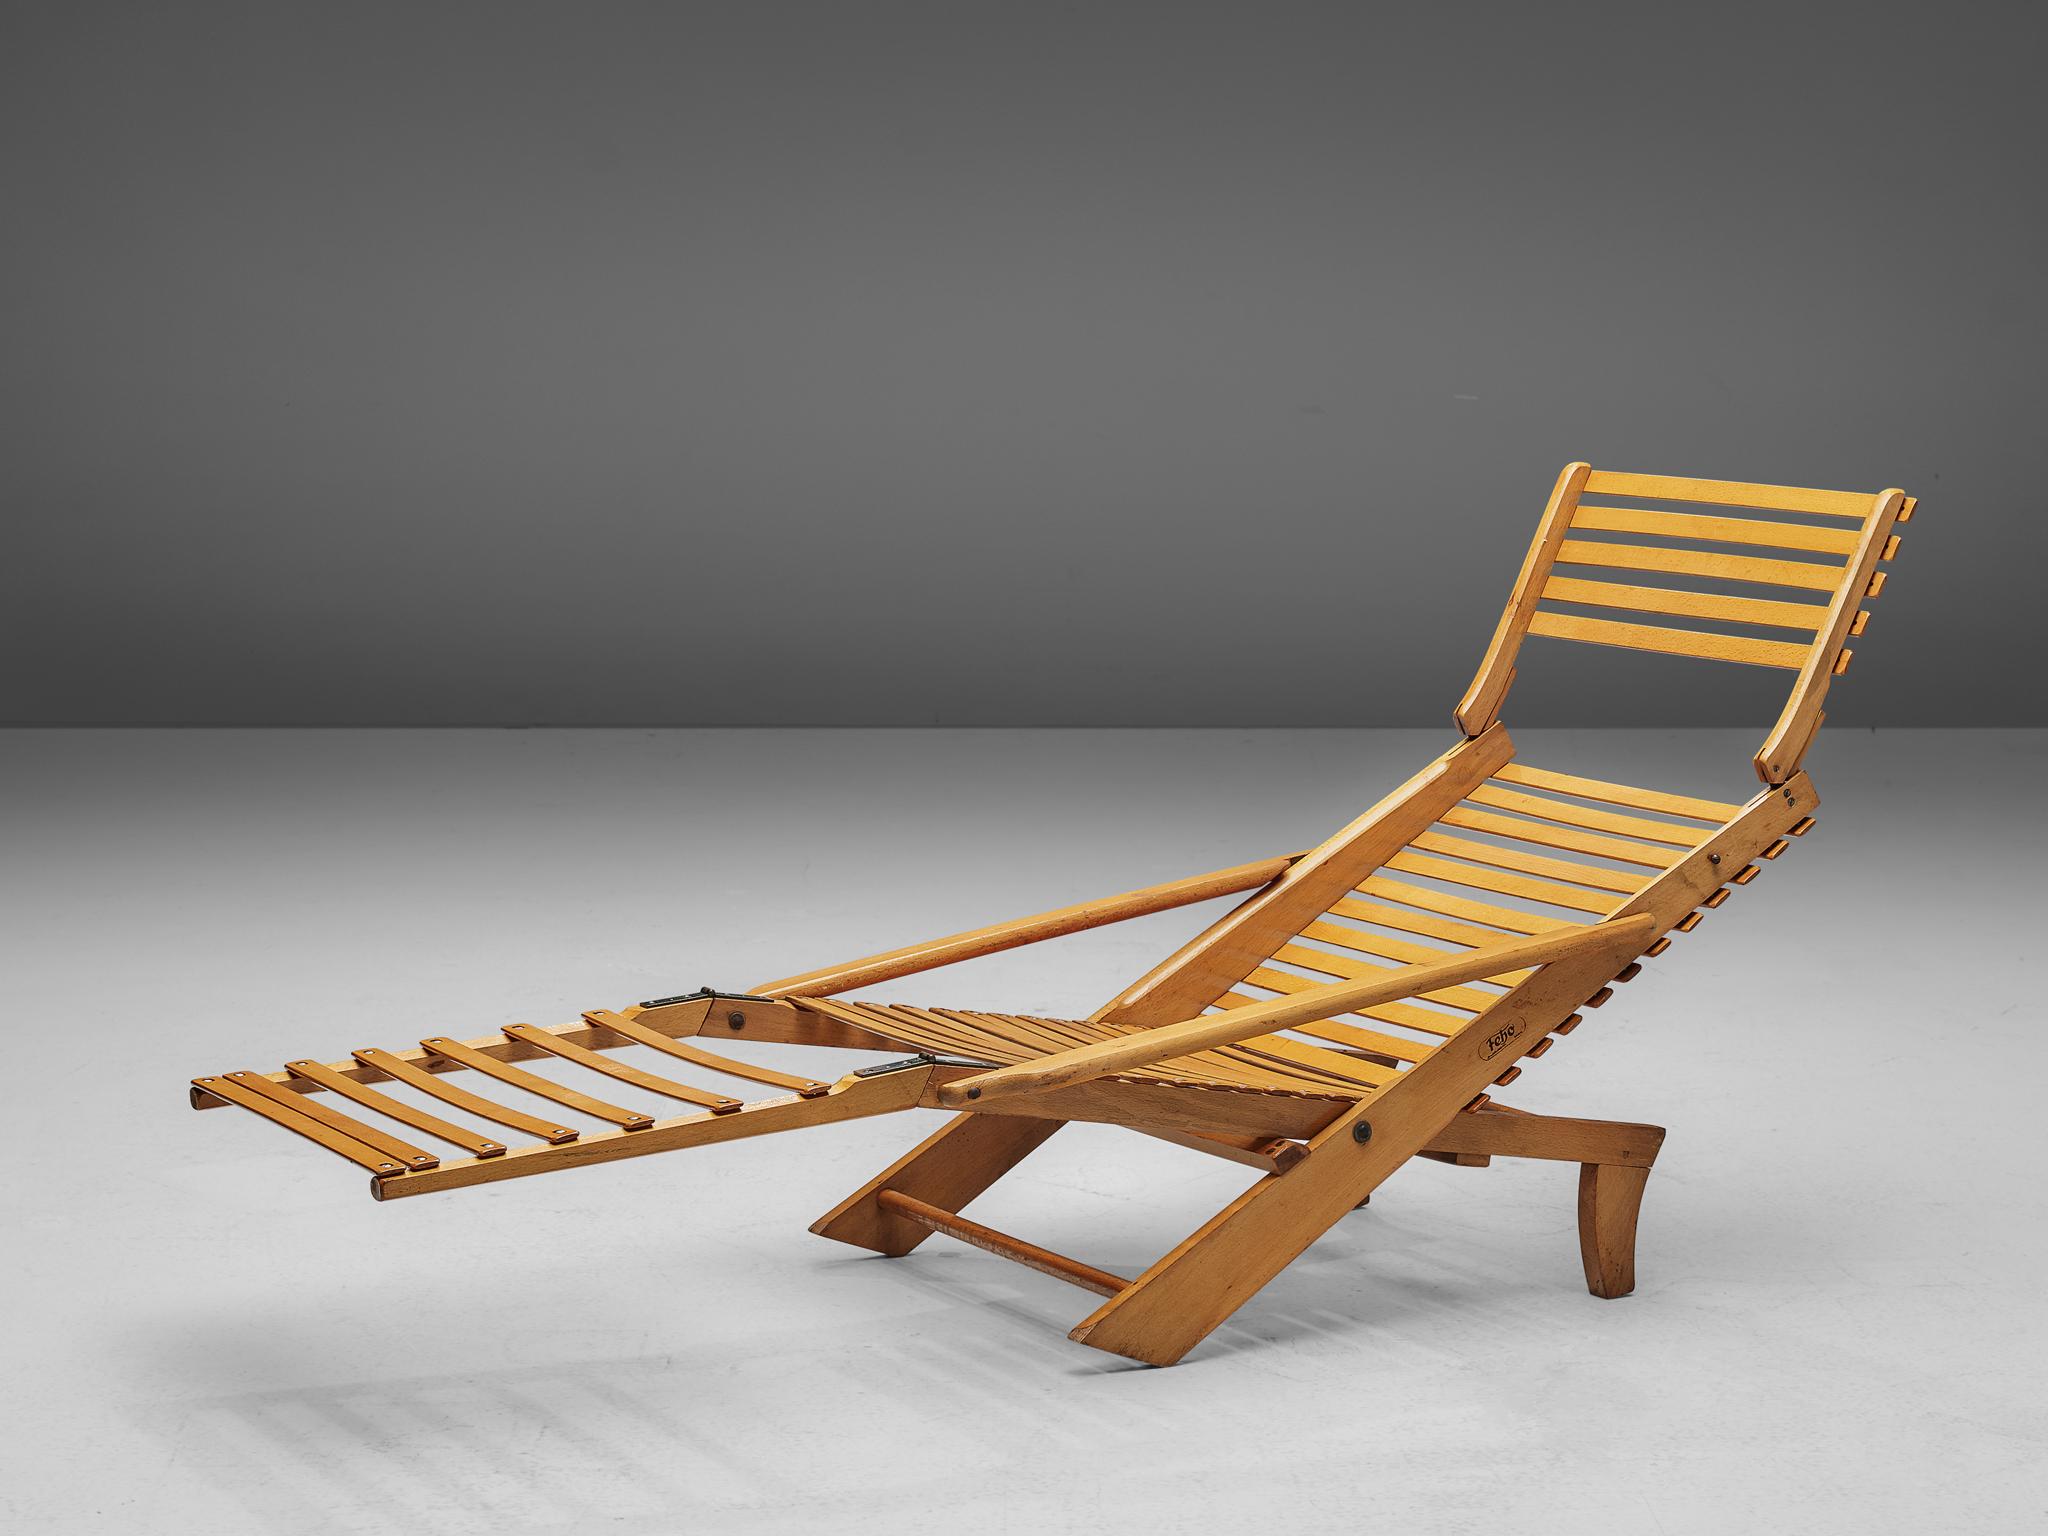 Feho Germany, foldable chaise lounge, stained solid beech, metal, Germany, 1930s

A rare-to-find foldable chaise lounge from the 1930s. Adjustable in different angles the chair provides great comfort and practical usage. The horizontally placed